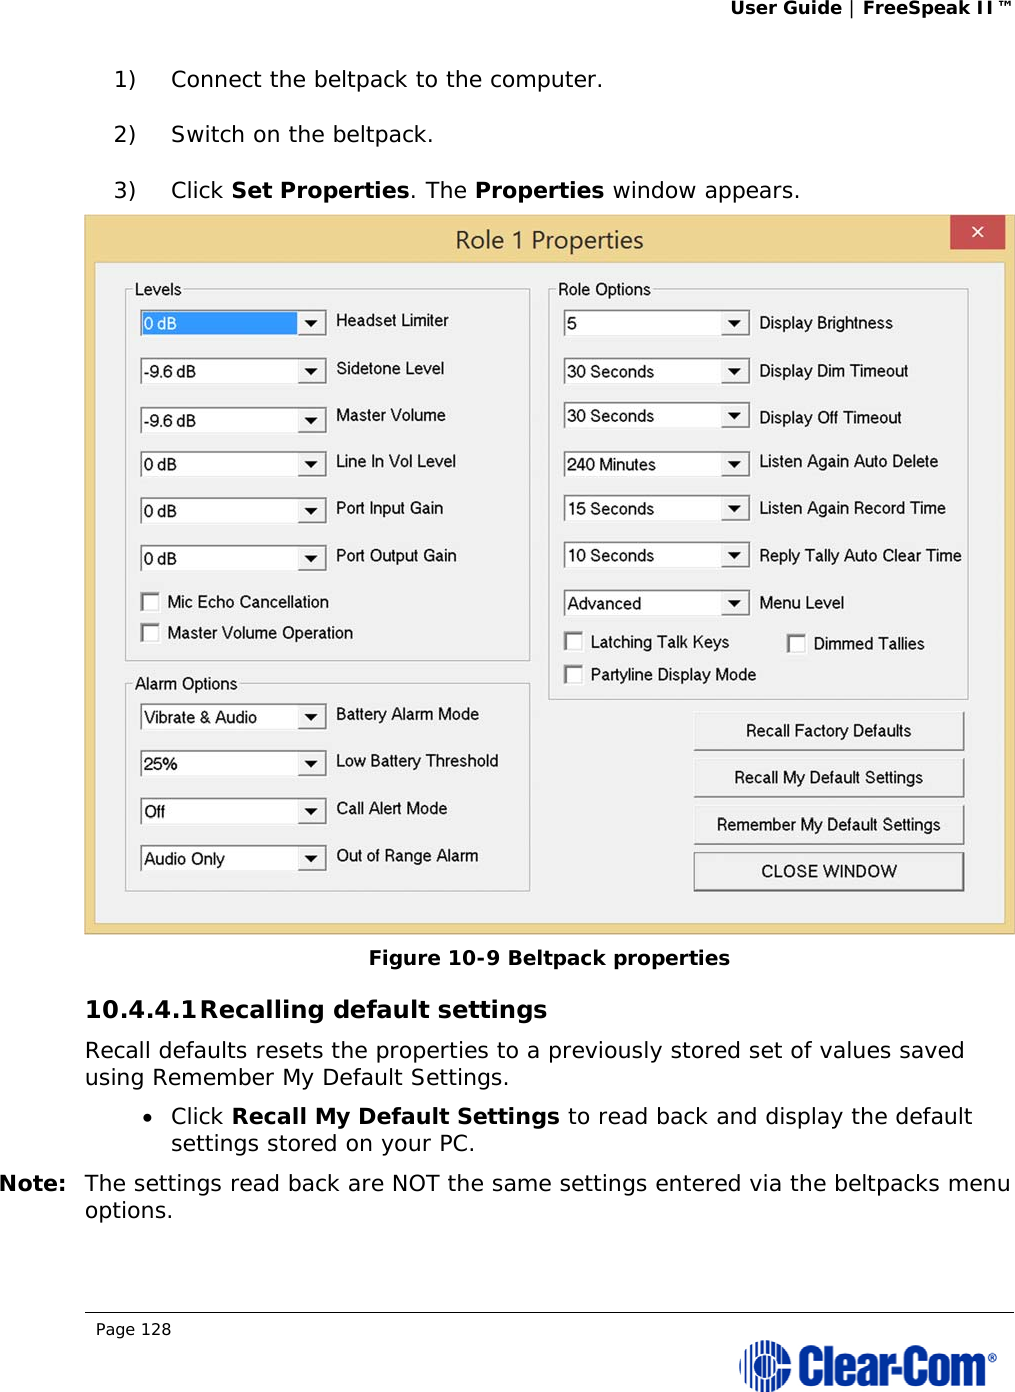 User Guide | FreeSpeak II™  Page 128  1) Connect the beltpack to the computer. 2) Switch on the beltpack. 3) Click Set Properties. The Properties window appears.  Figure 10-9 Beltpack properties 10.4.4.1 Recalling default settings Recall defaults resets the properties to a previously stored set of values saved using Remember My Default Settings.  Click Recall My Default Settings to read back and display the default settings stored on your PC.  Note: The settings read back are NOT the same settings entered via the beltpacks menu options. 